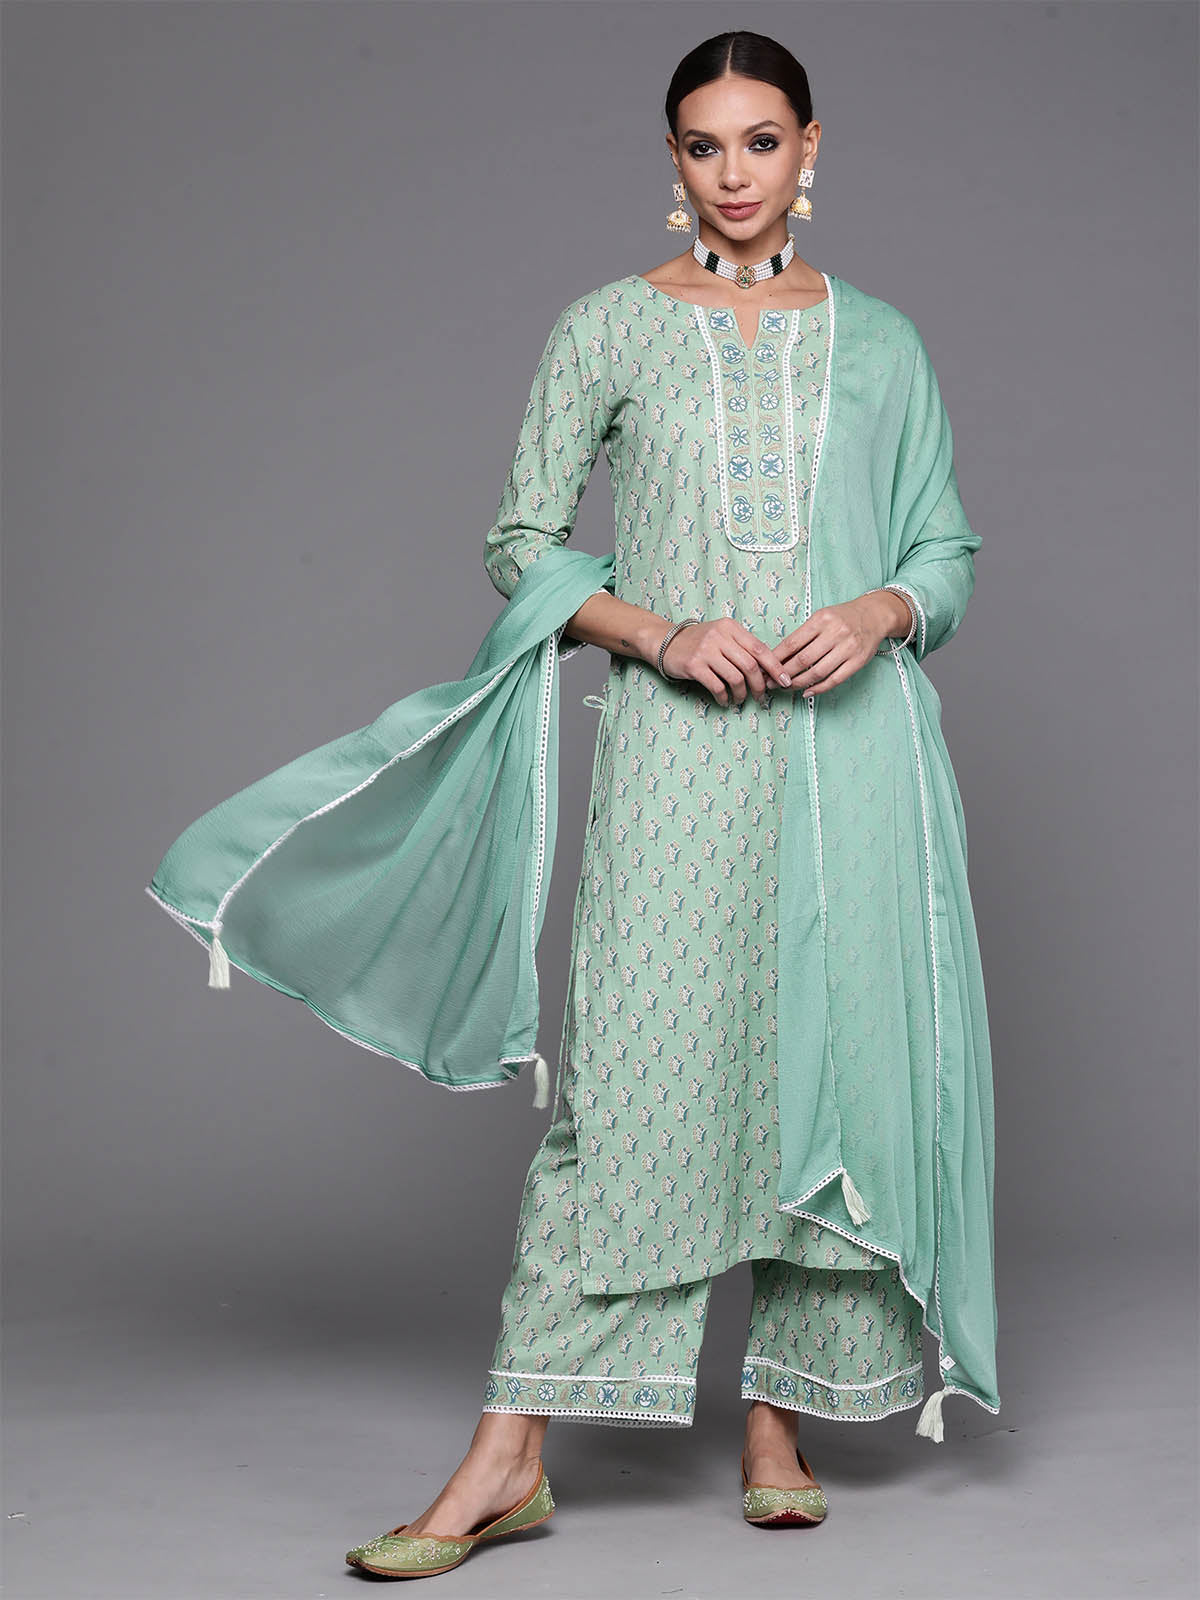 Women's Sea Green Floral Printed Straight Kurta Palazzzo With Dupatta Set - Odette